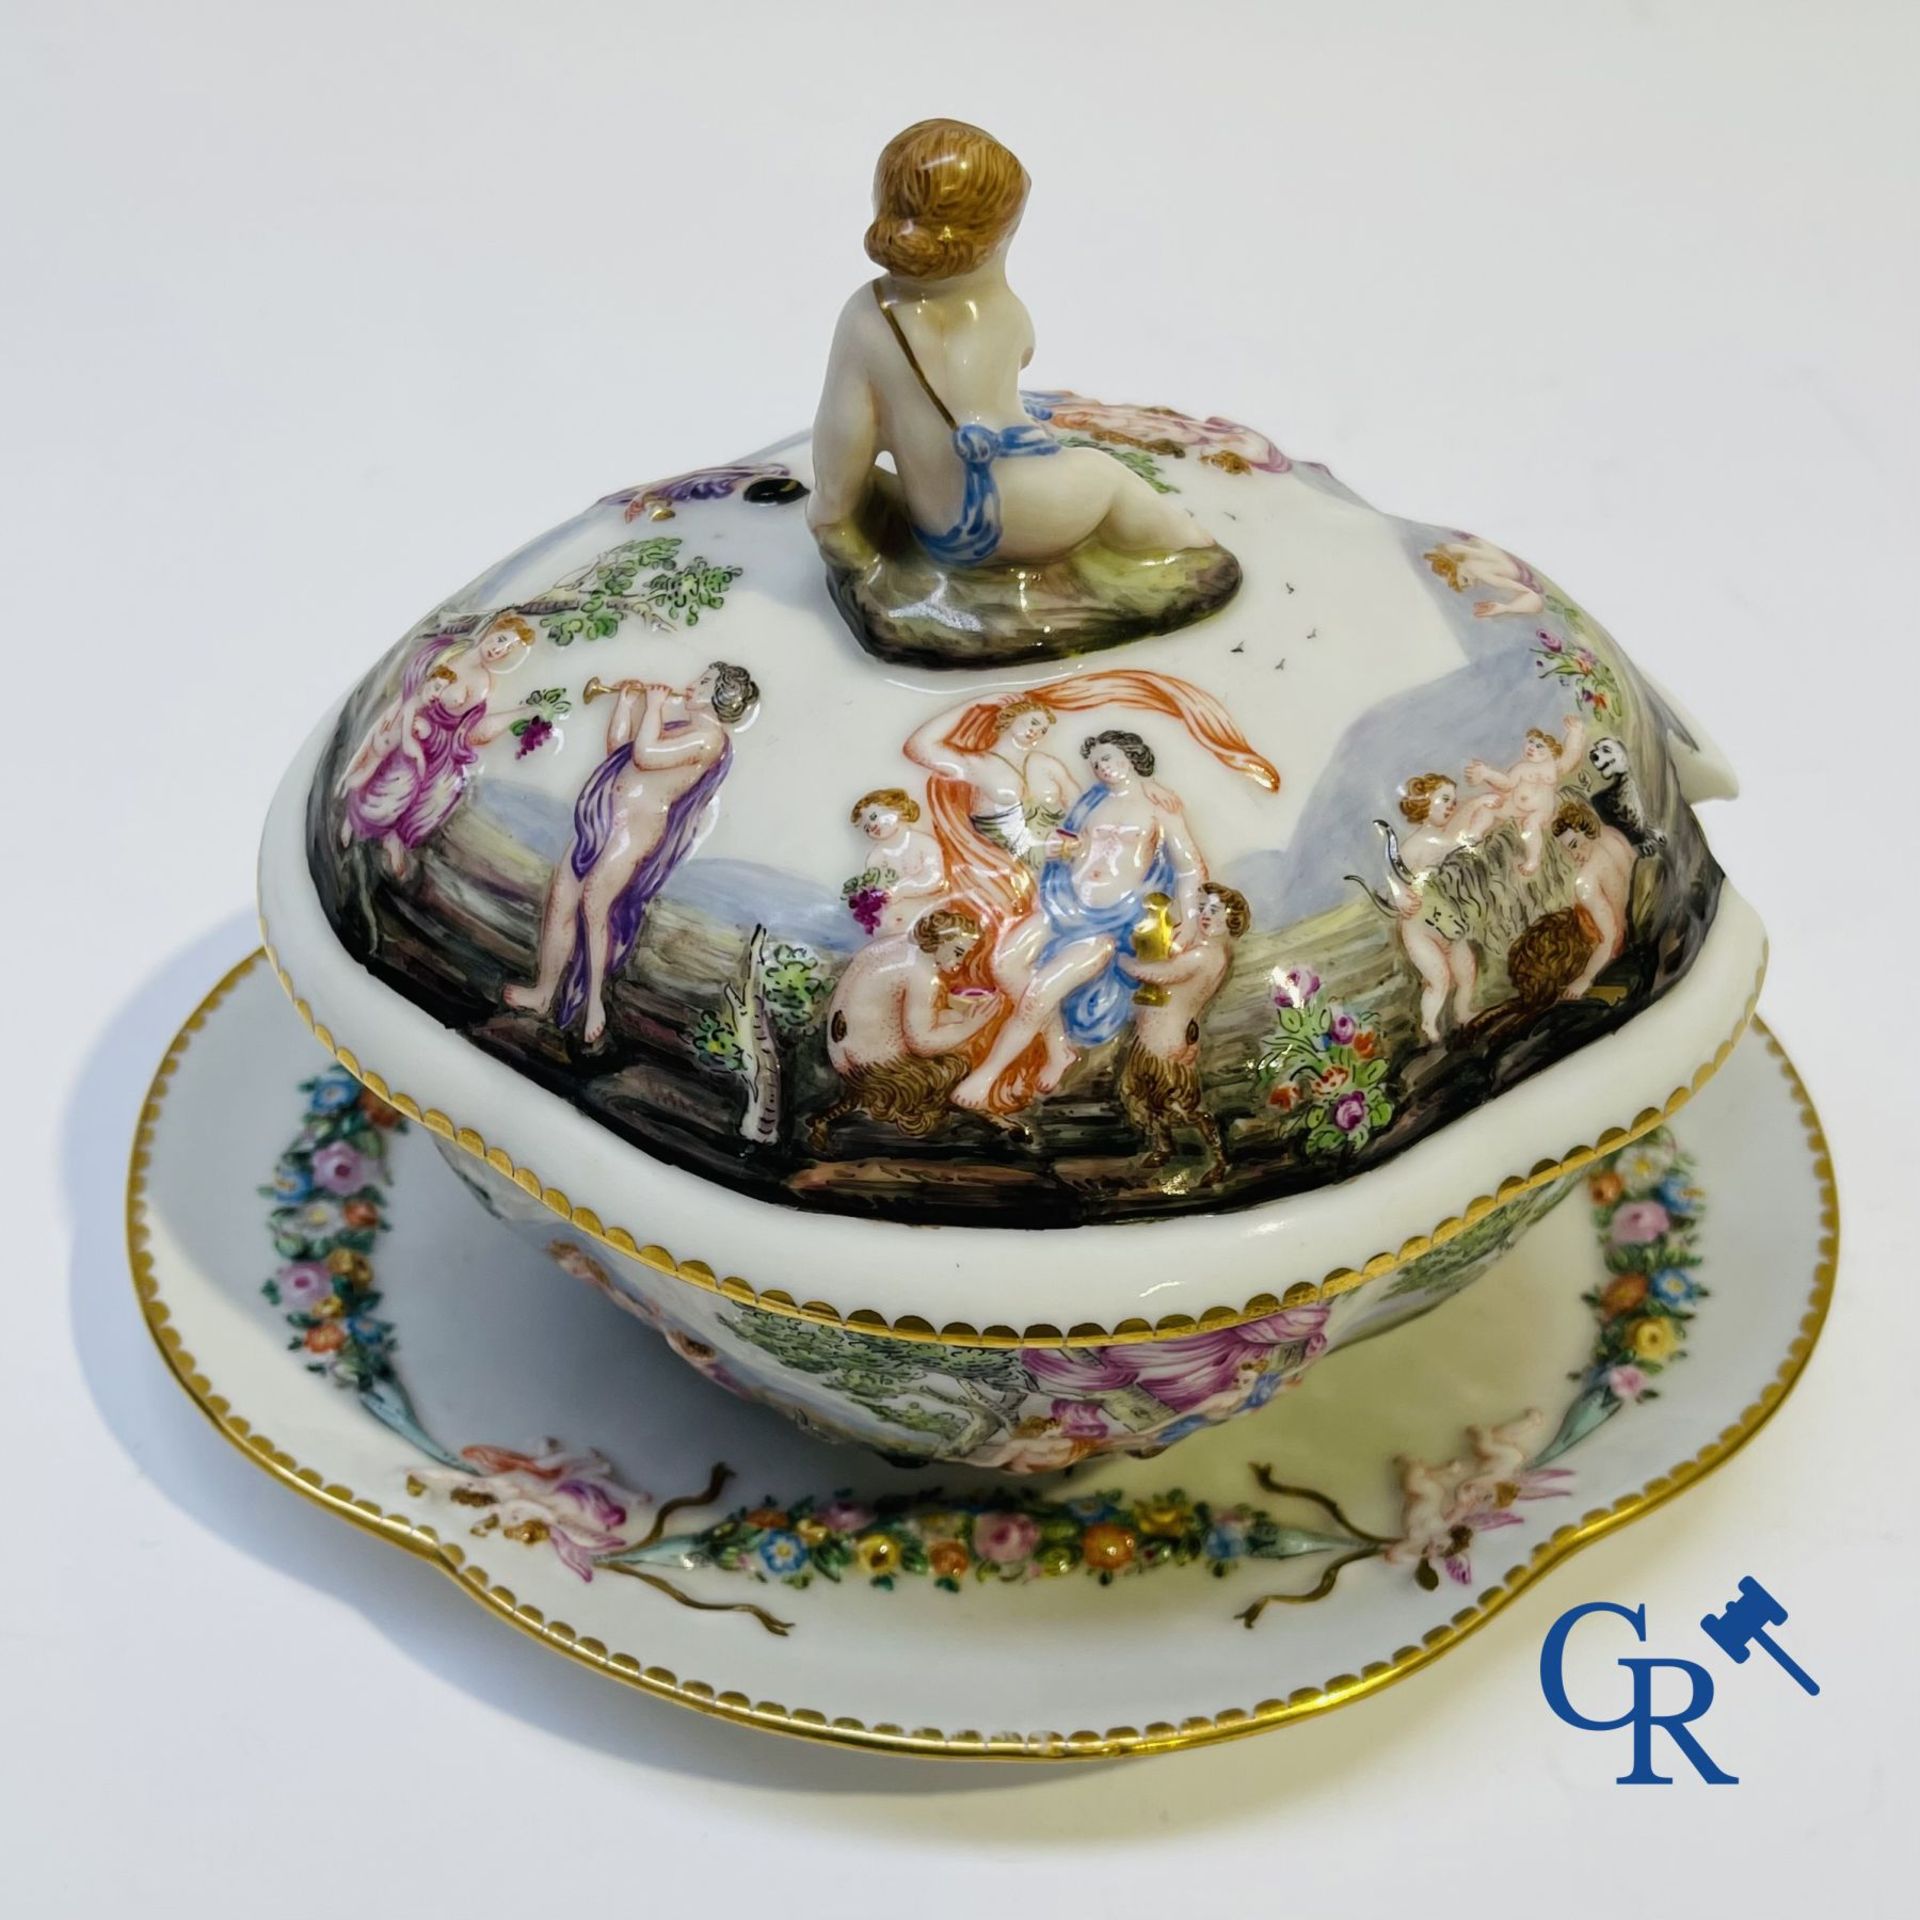 Porcelain: 2 pieces of fine porcelain with mythological scenes. 19th century. - Image 5 of 12